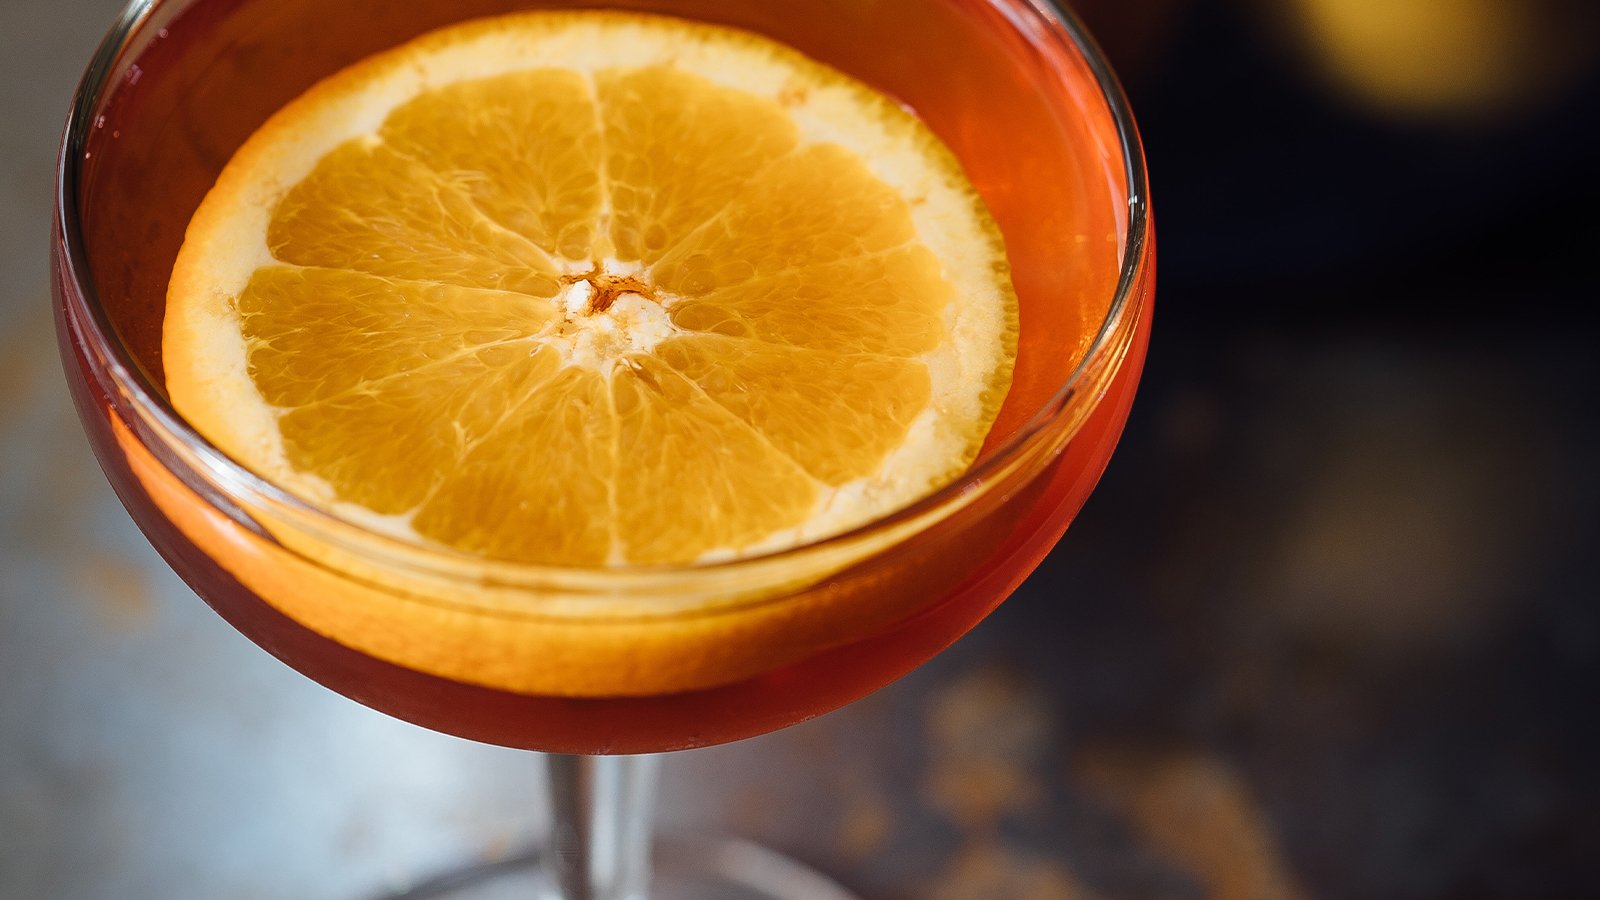 A closeup of a slice of orange in a cocktail.